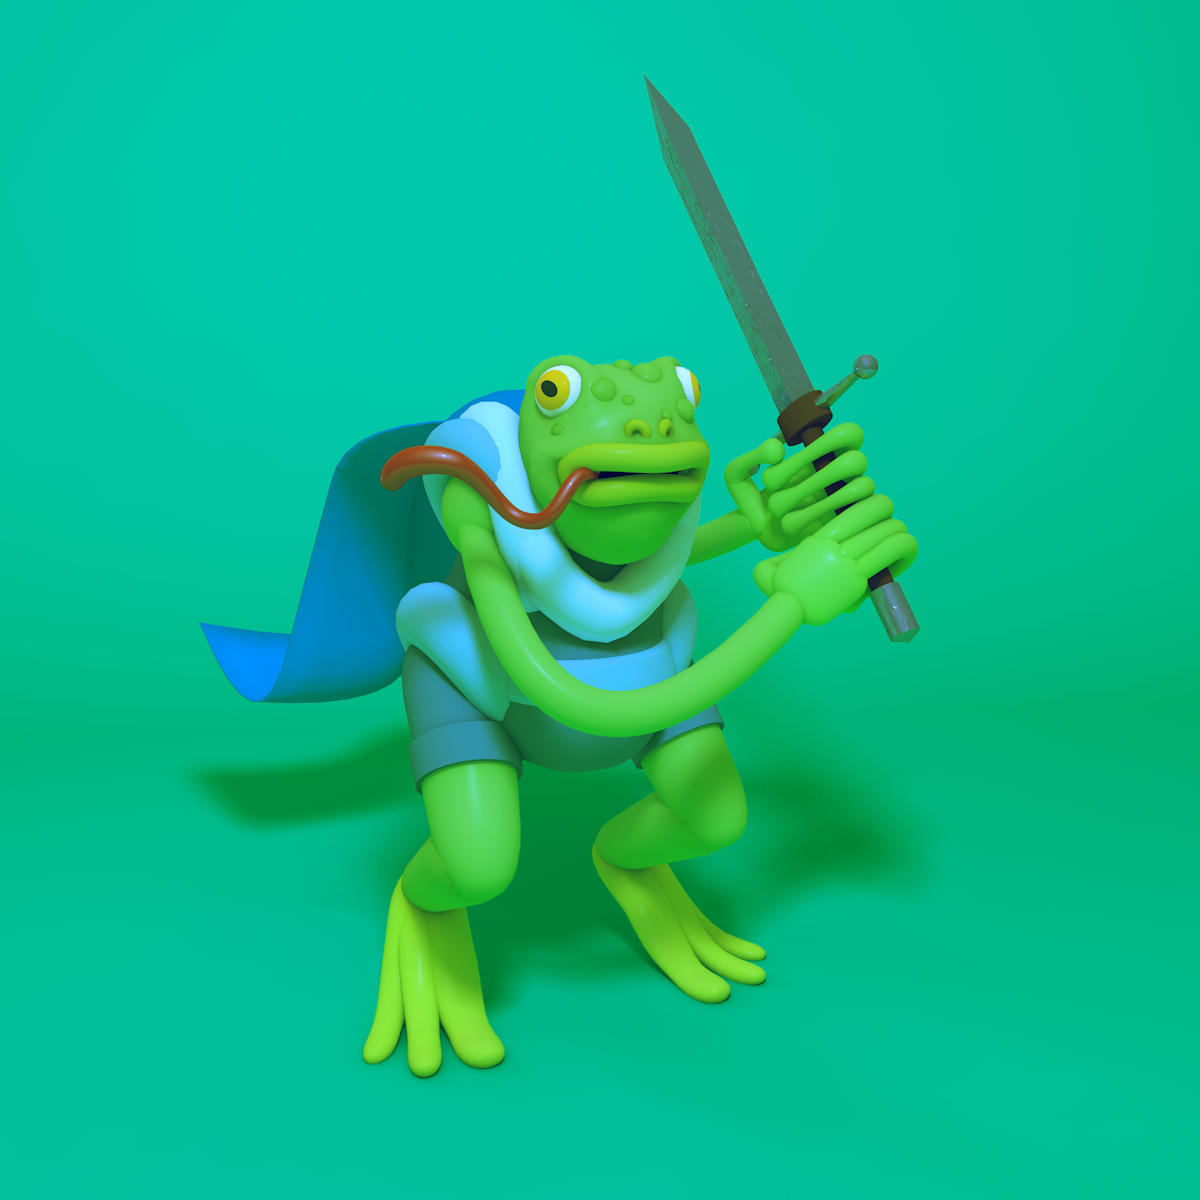 3D Characters 3d fantasy characters 3D illustration animal characters animal illustration Character design  fantasty art fantasy characters fantasy illustration weapons